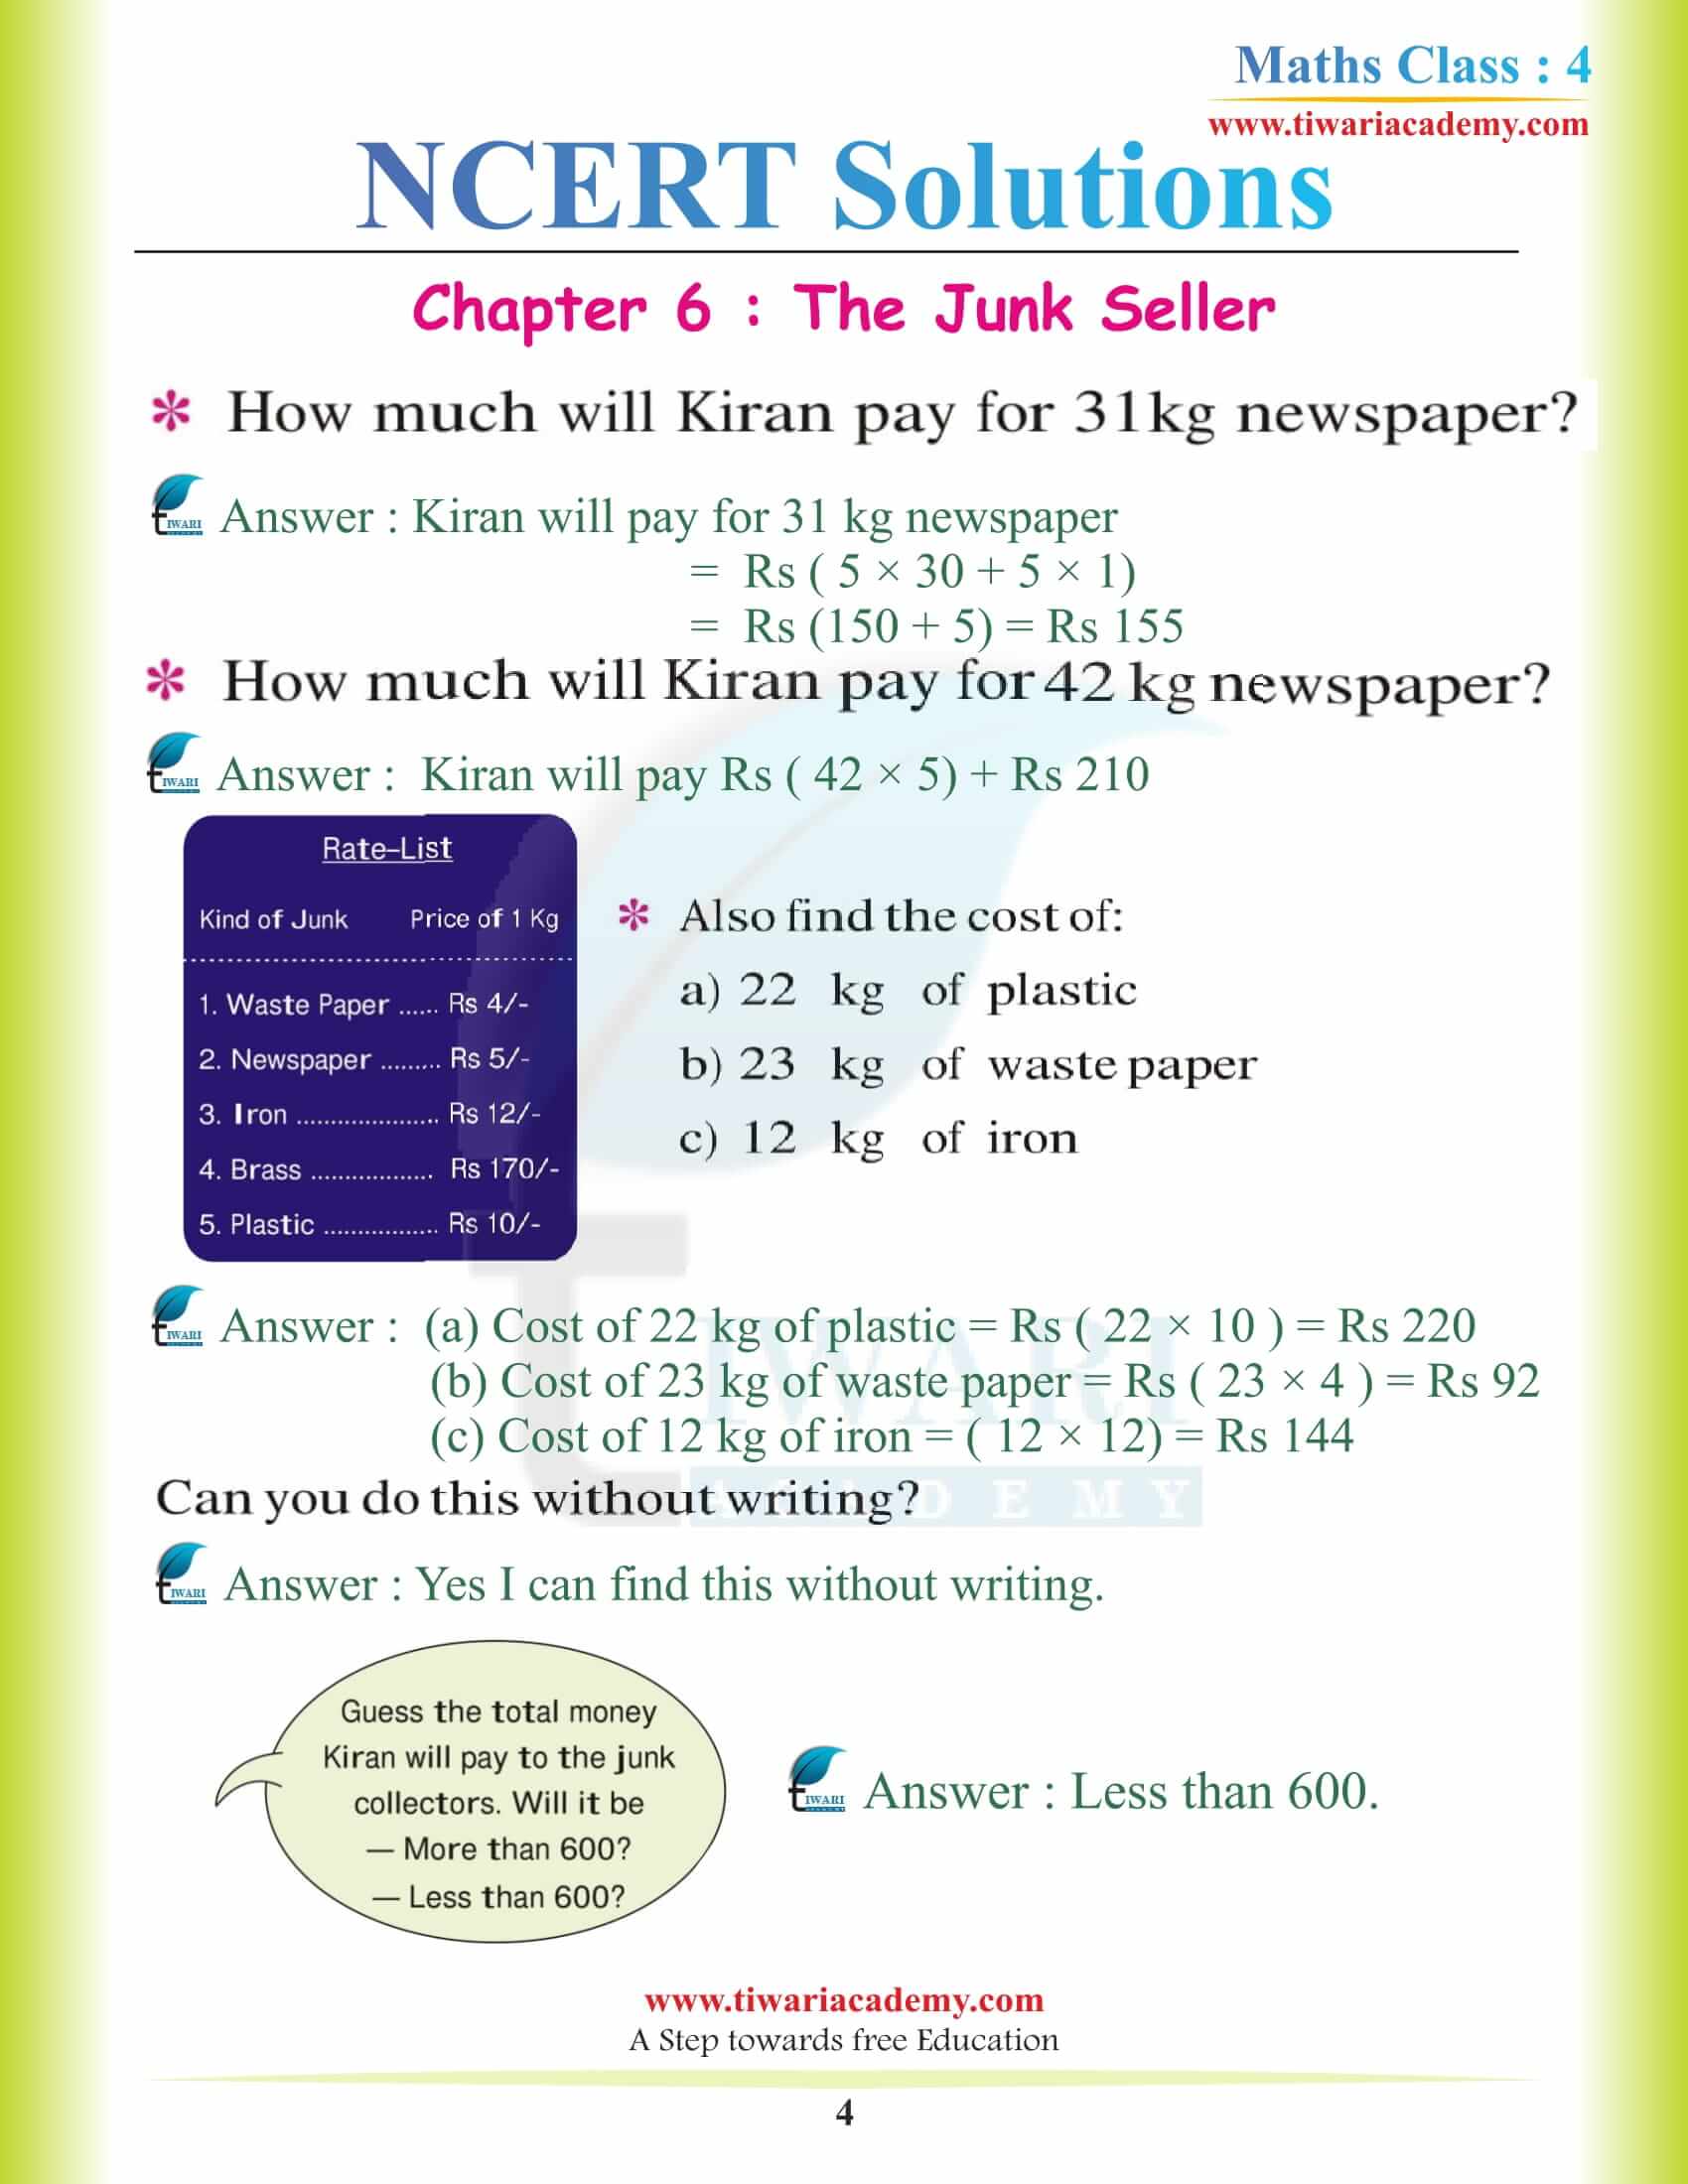 NCERT Solutions for Class 4 Maths Chapter 6 pdf free